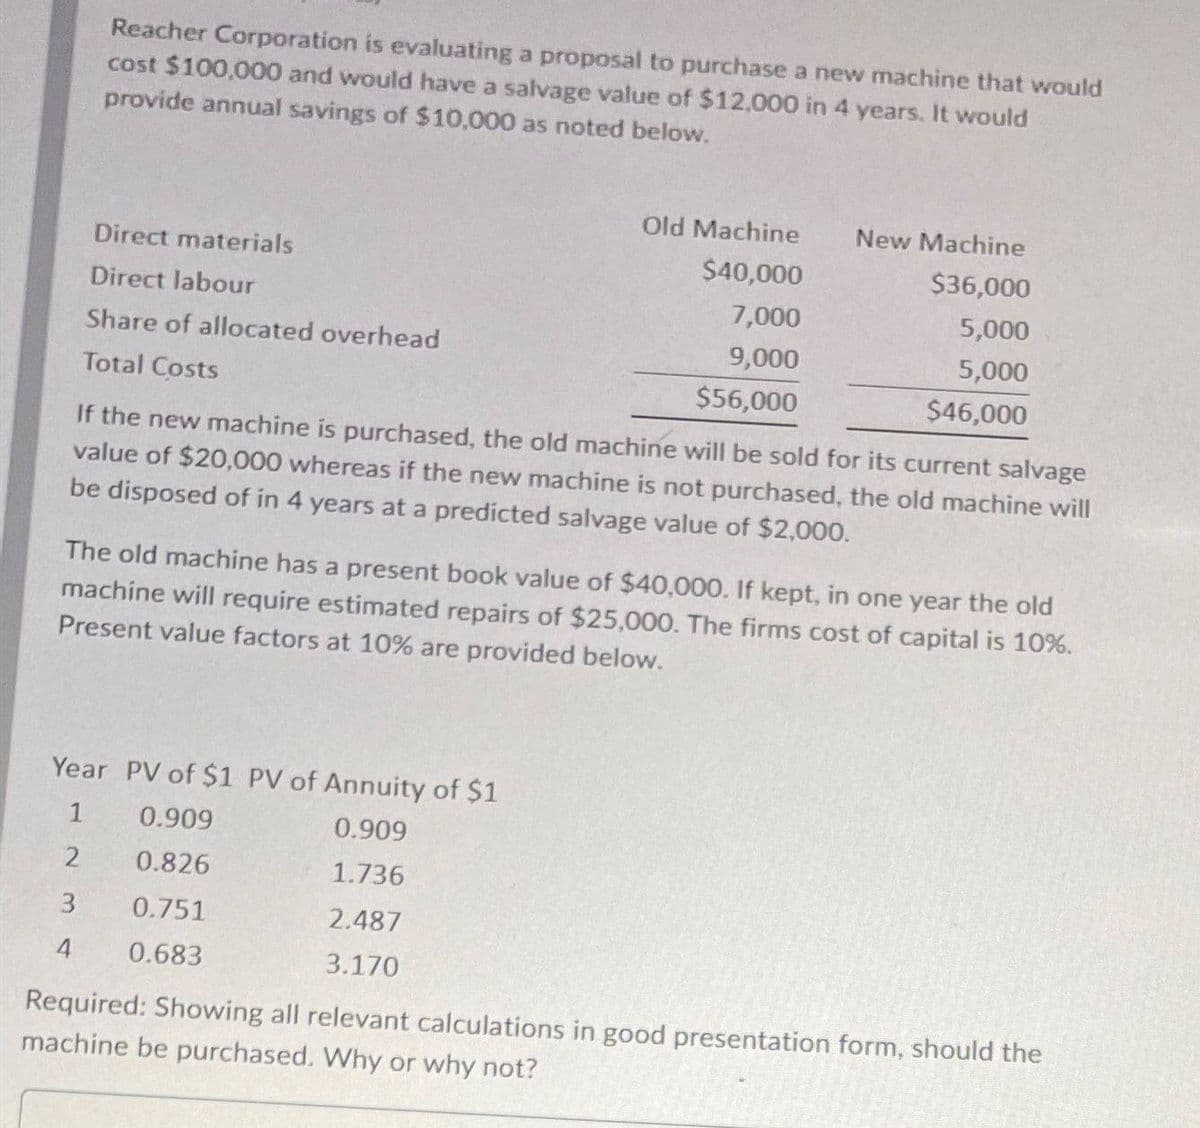 Reacher Corporation is evaluating a proposal to purchase a new machine that would
cost $100,000 and would have a salvage value of $12,000 in 4 years. It would
provide annual savings of $10,000 as noted below.
Direct materials
Direct labour
Share of allocated overhead
Old Machine
$40,000
New Machine
$36,000
7,000
5,000
9,000
5,000
$56,000
$46,000
Total Costs
If the new machine is purchased, the old machine will be sold for its current salvage
value of $20,000 whereas if the new machine is not purchased, the old machine will
be disposed of in 4 years at a predicted salvage value of $2,000.
The old machine has a present book value of $40,000. If kept, in one year the old
machine will require estimated repairs of $25,000. The firms cost of capital is 10%.
Present value factors at 10% are provided below.
Year PV of $1 PV of Annuity of $1
1 0.909
0.909
2
0.826
1.736
3
0.751
2.487
0.683
3.170
Required: Showing all relevant calculations in good presentation form, should the
machine be purchased. Why or why not?